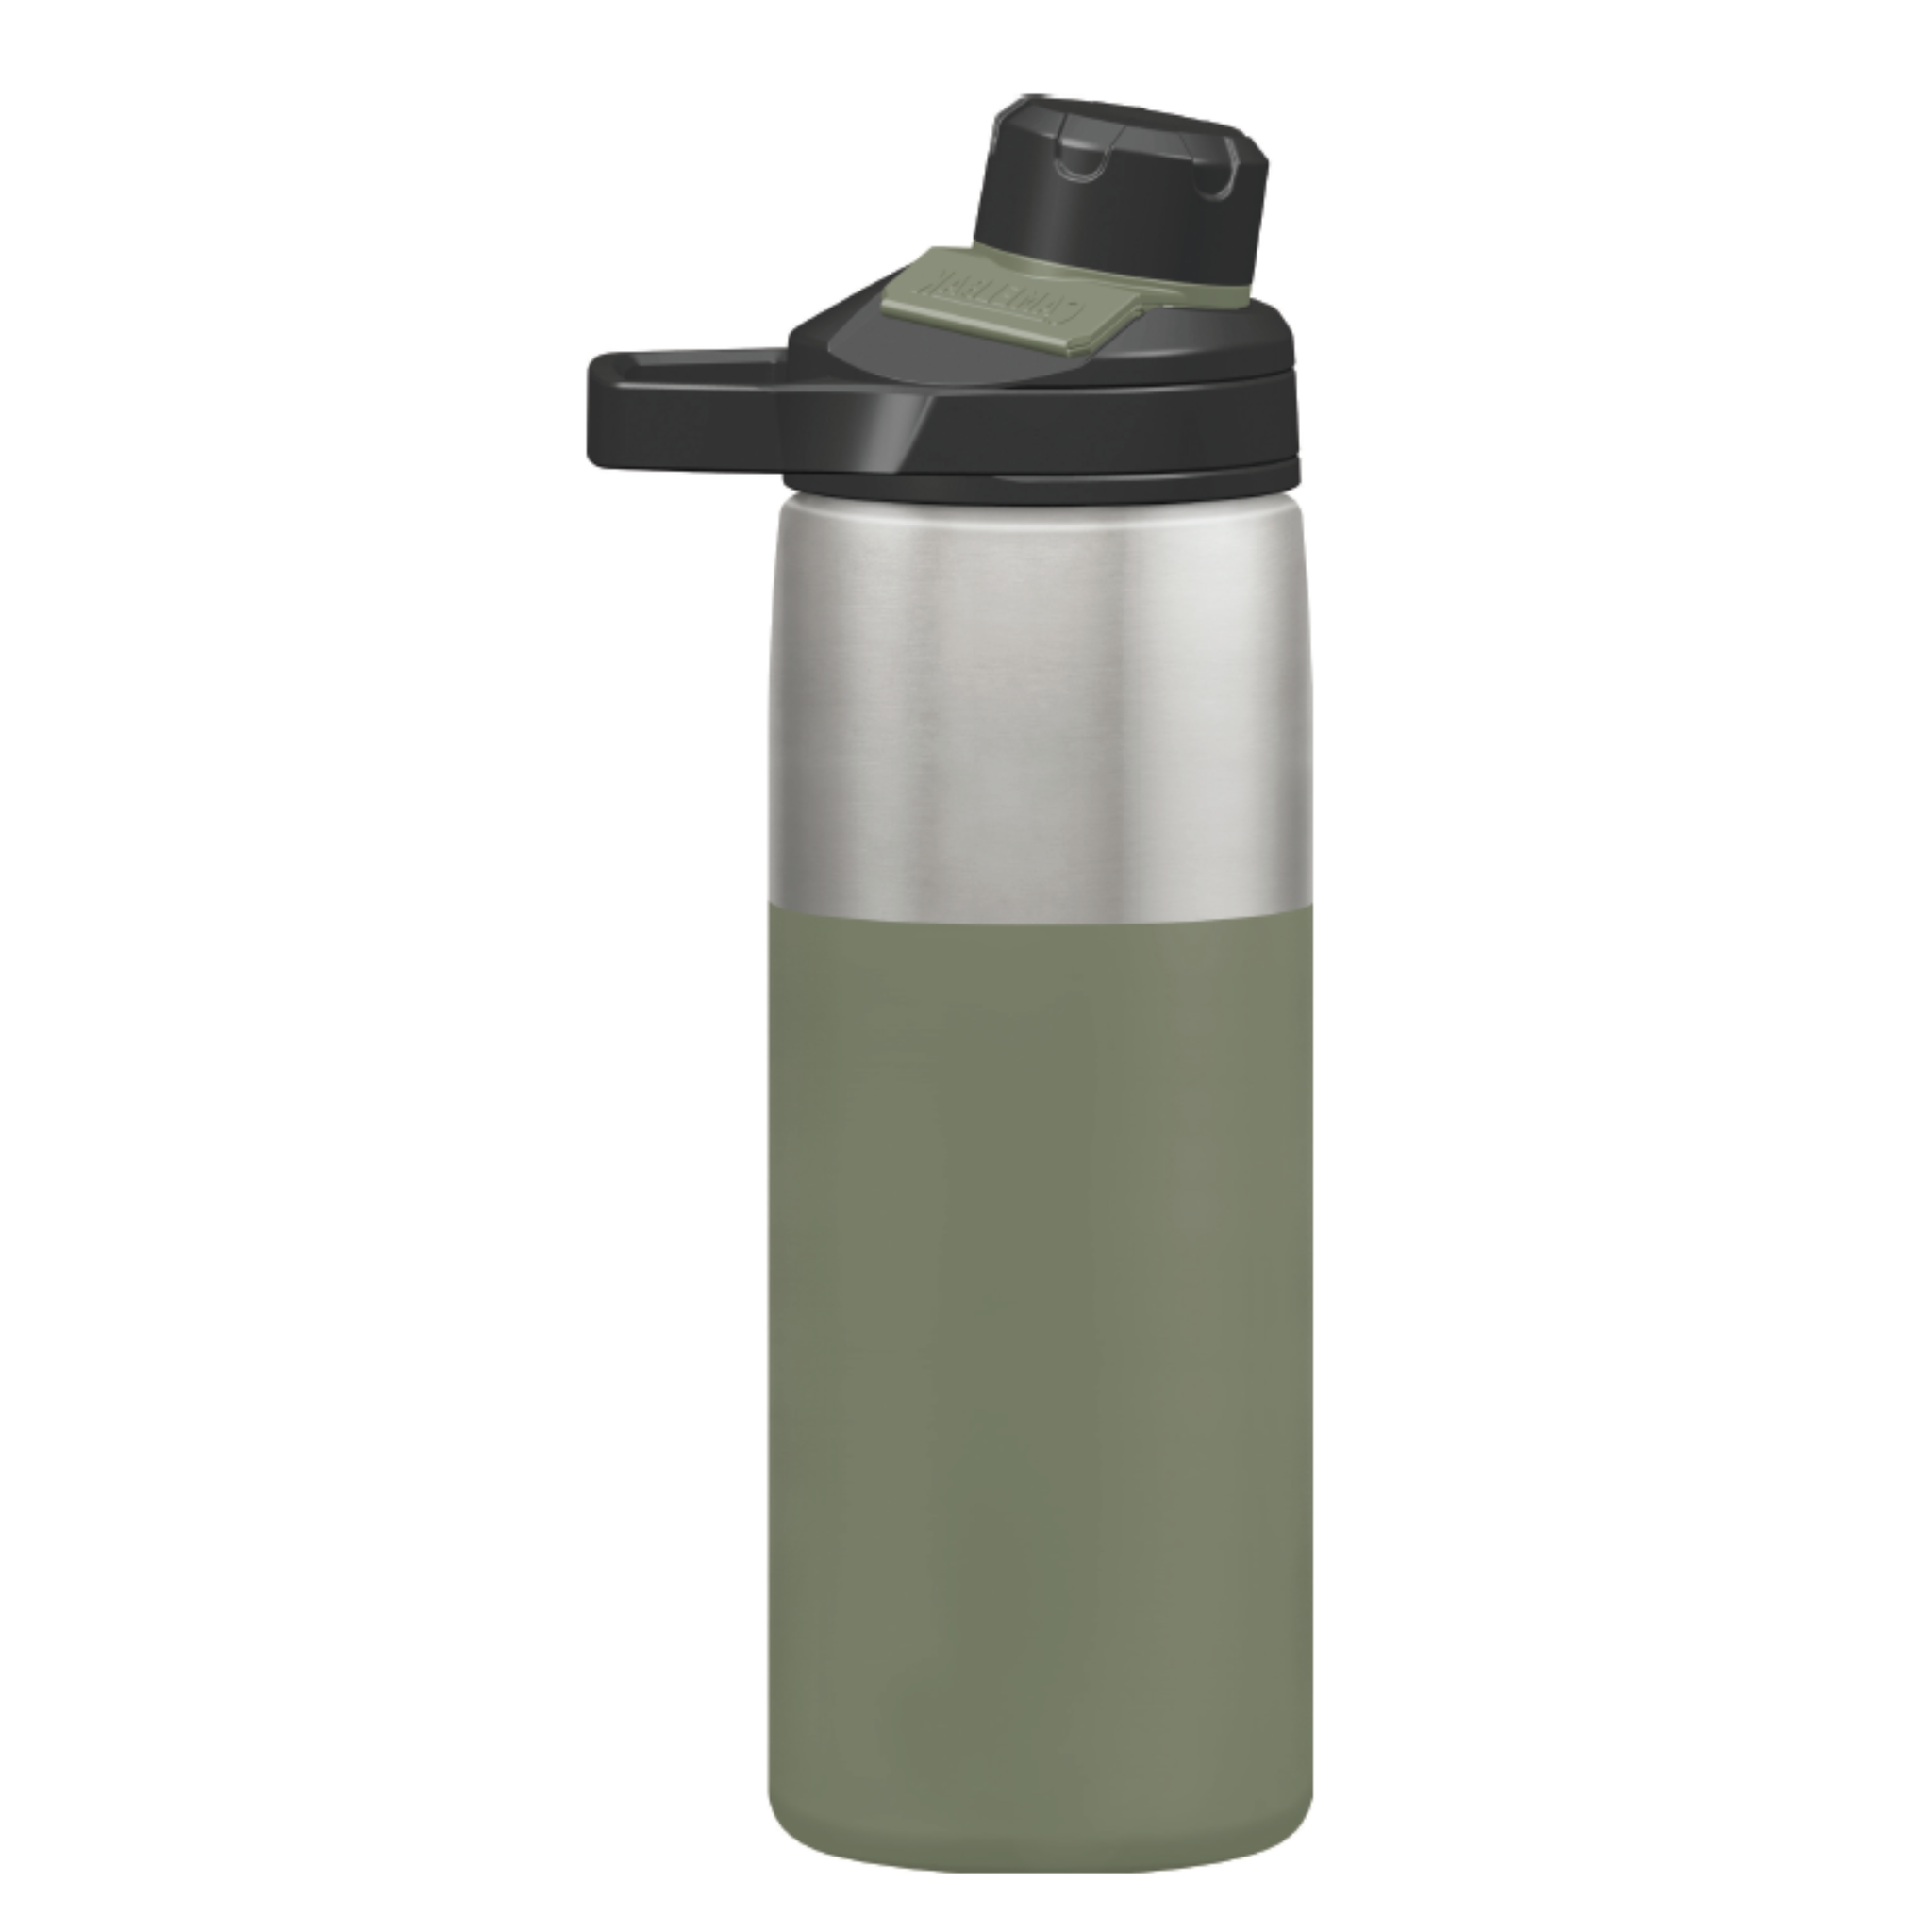 New CamelBak Chute Mag Vacuum Insulated Stainless Steel Water Bottle, Olive  32oz